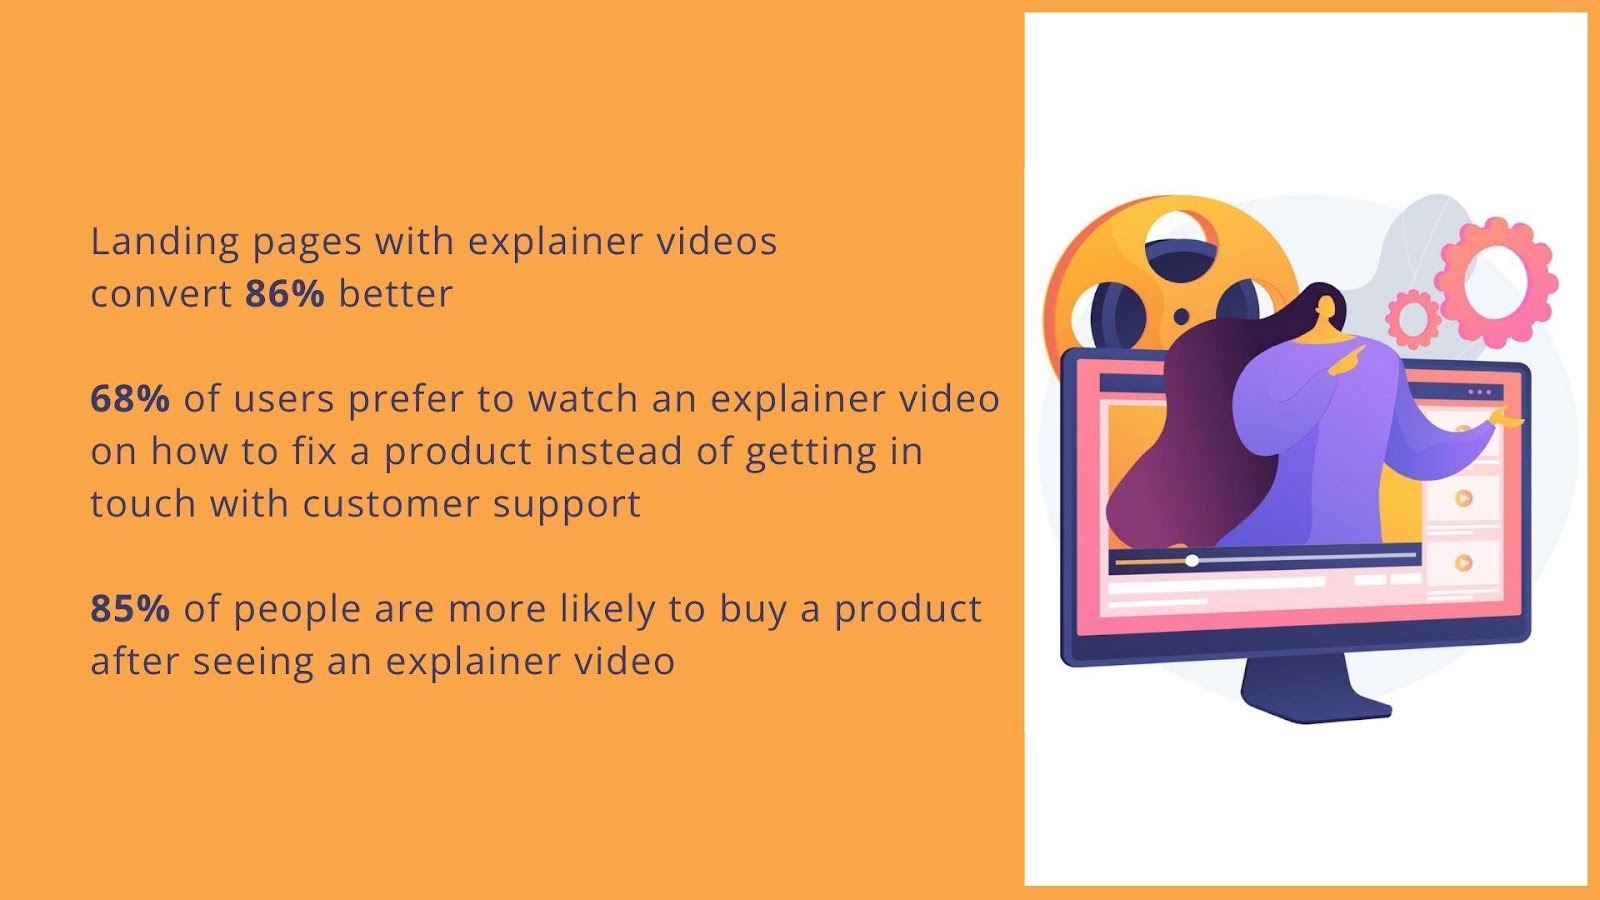 Landing pages with explainer videos convert 86% better, 96% of people have watched an explainer video to get a better understanding of a product, 68% of users prefer to watch an explainer video on how to fix a product instead of getting in touch with customer support, 85% of people are more likely to buy a product after seeing an explainer video.